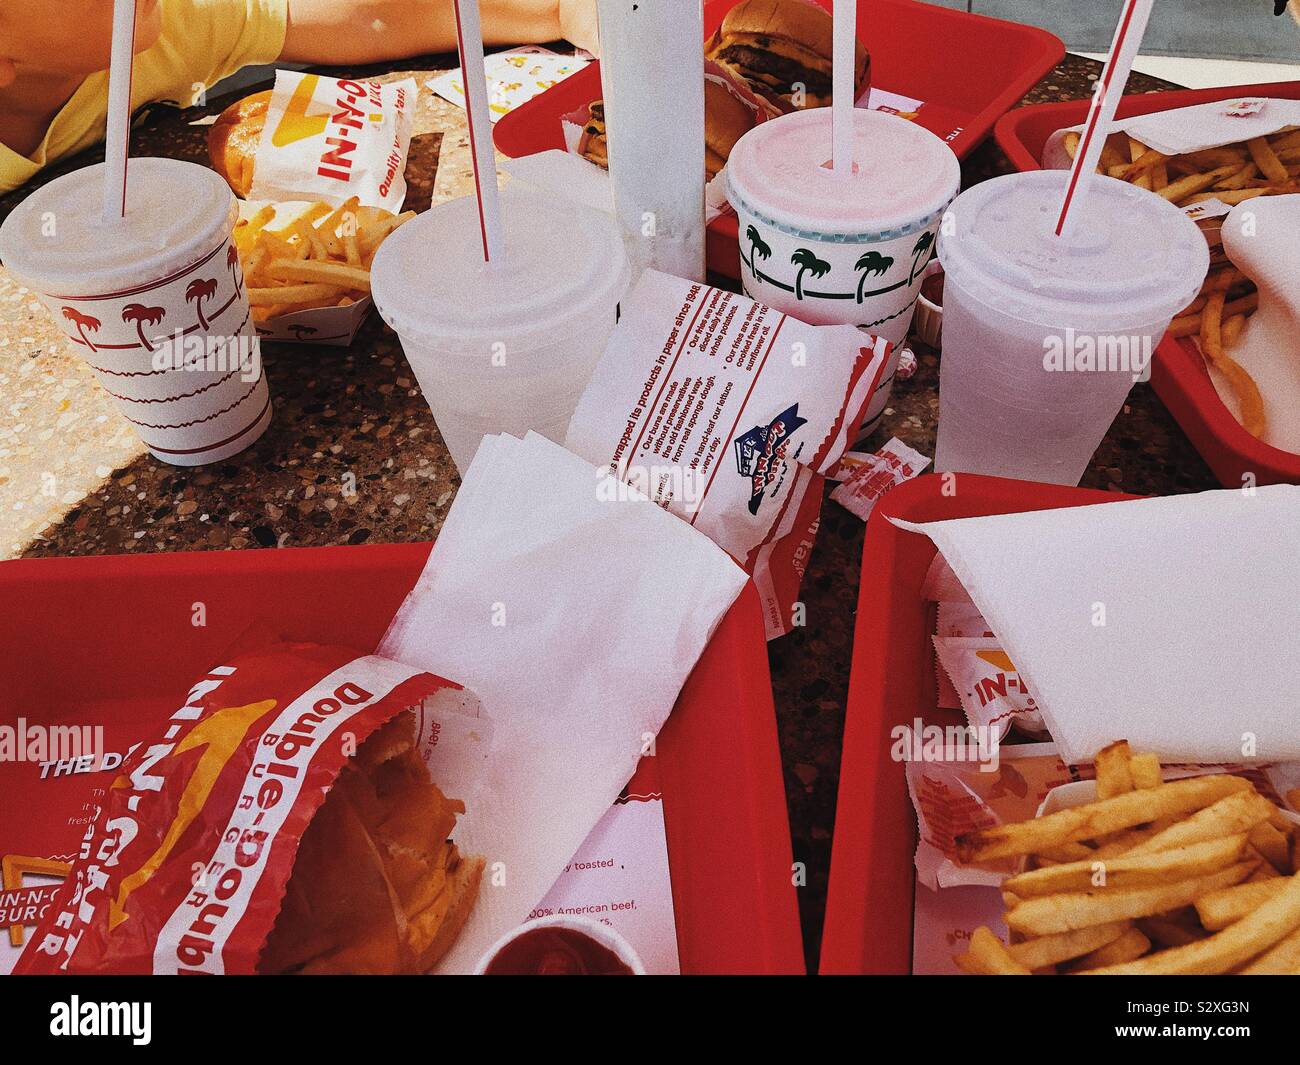 Food at in and out burger. Stock Photo